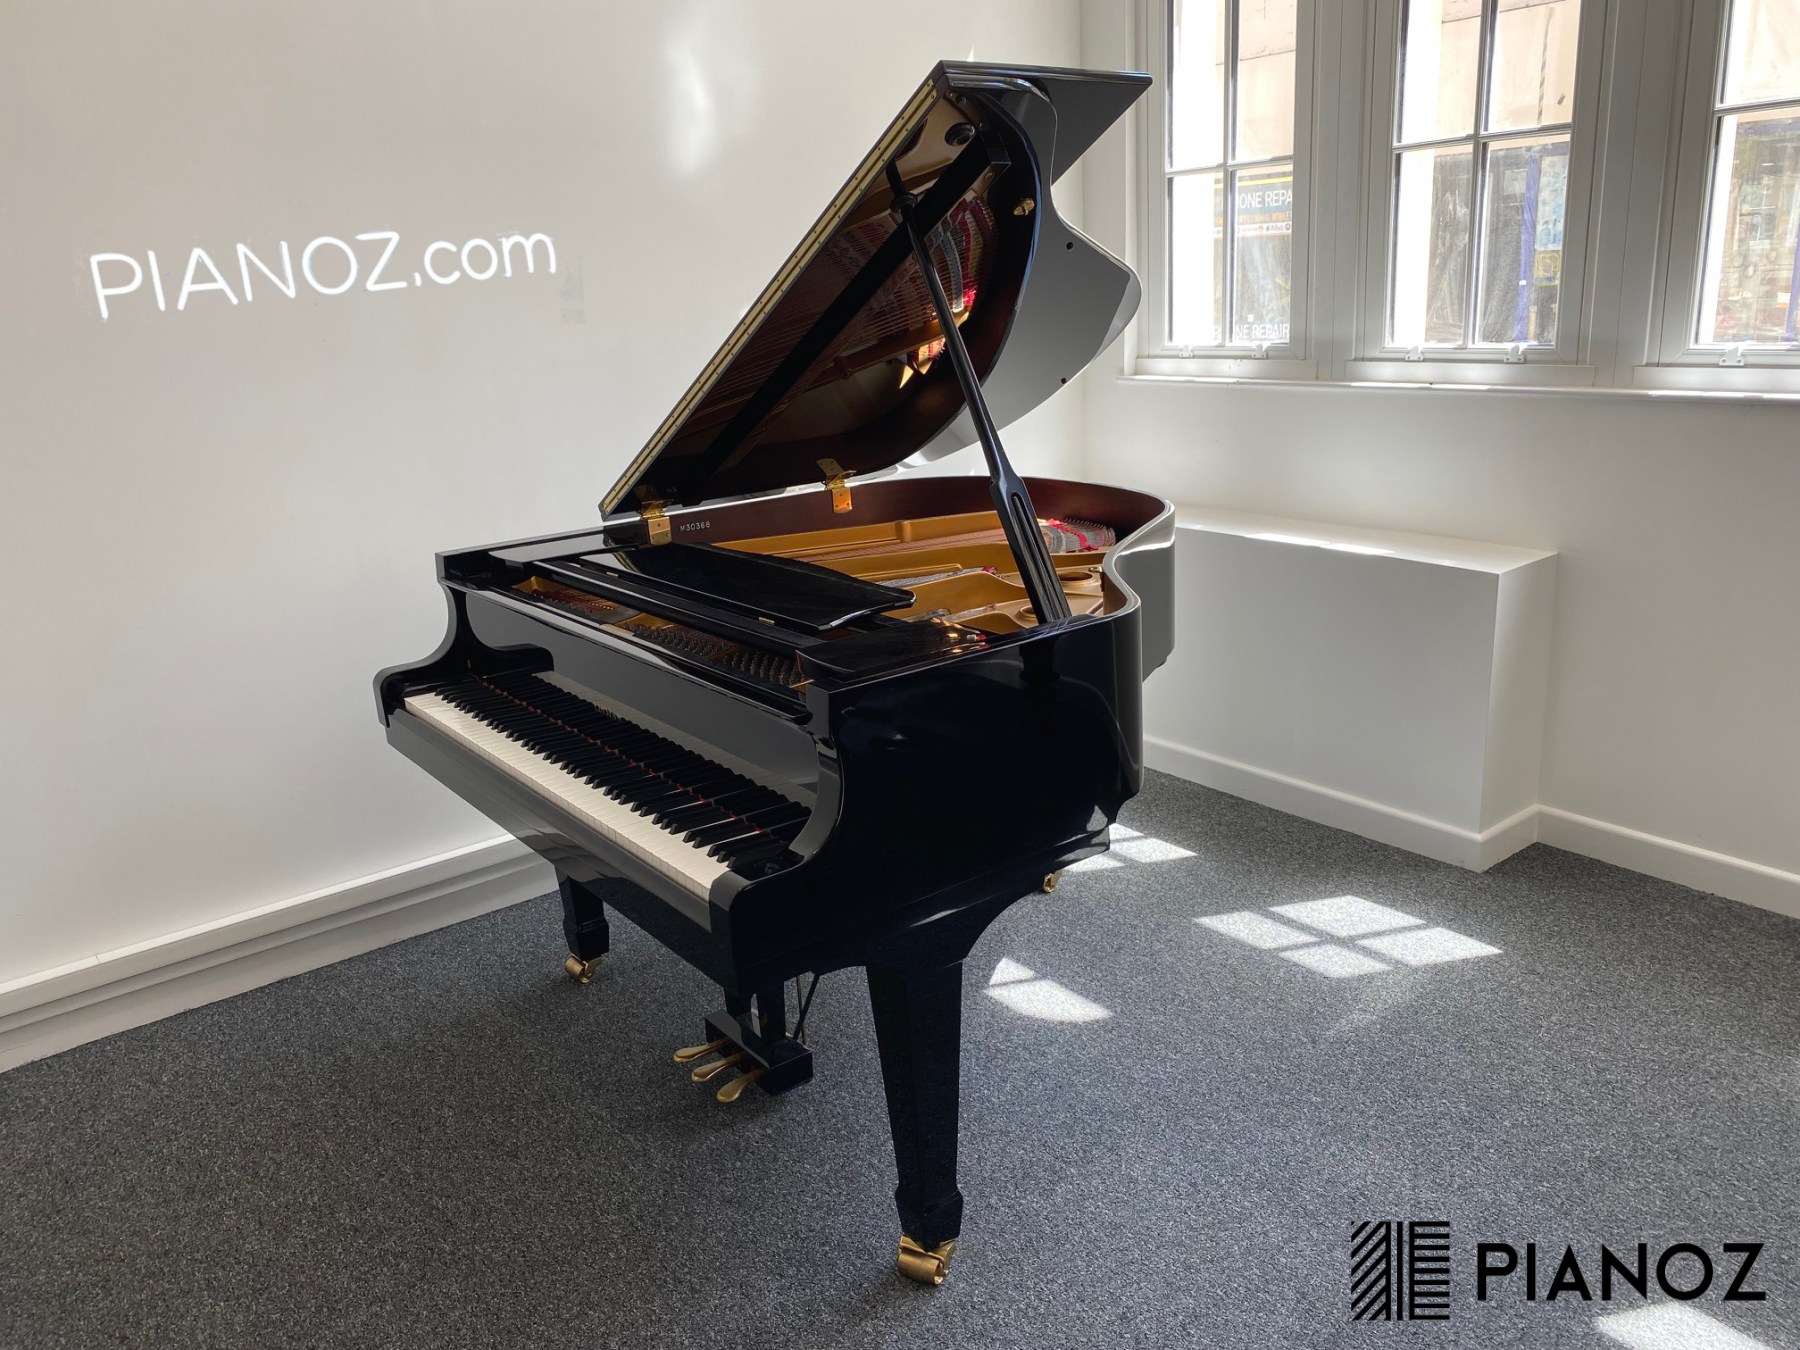 Weber Elysian 157 Baby Grand Piano piano for sale in UK